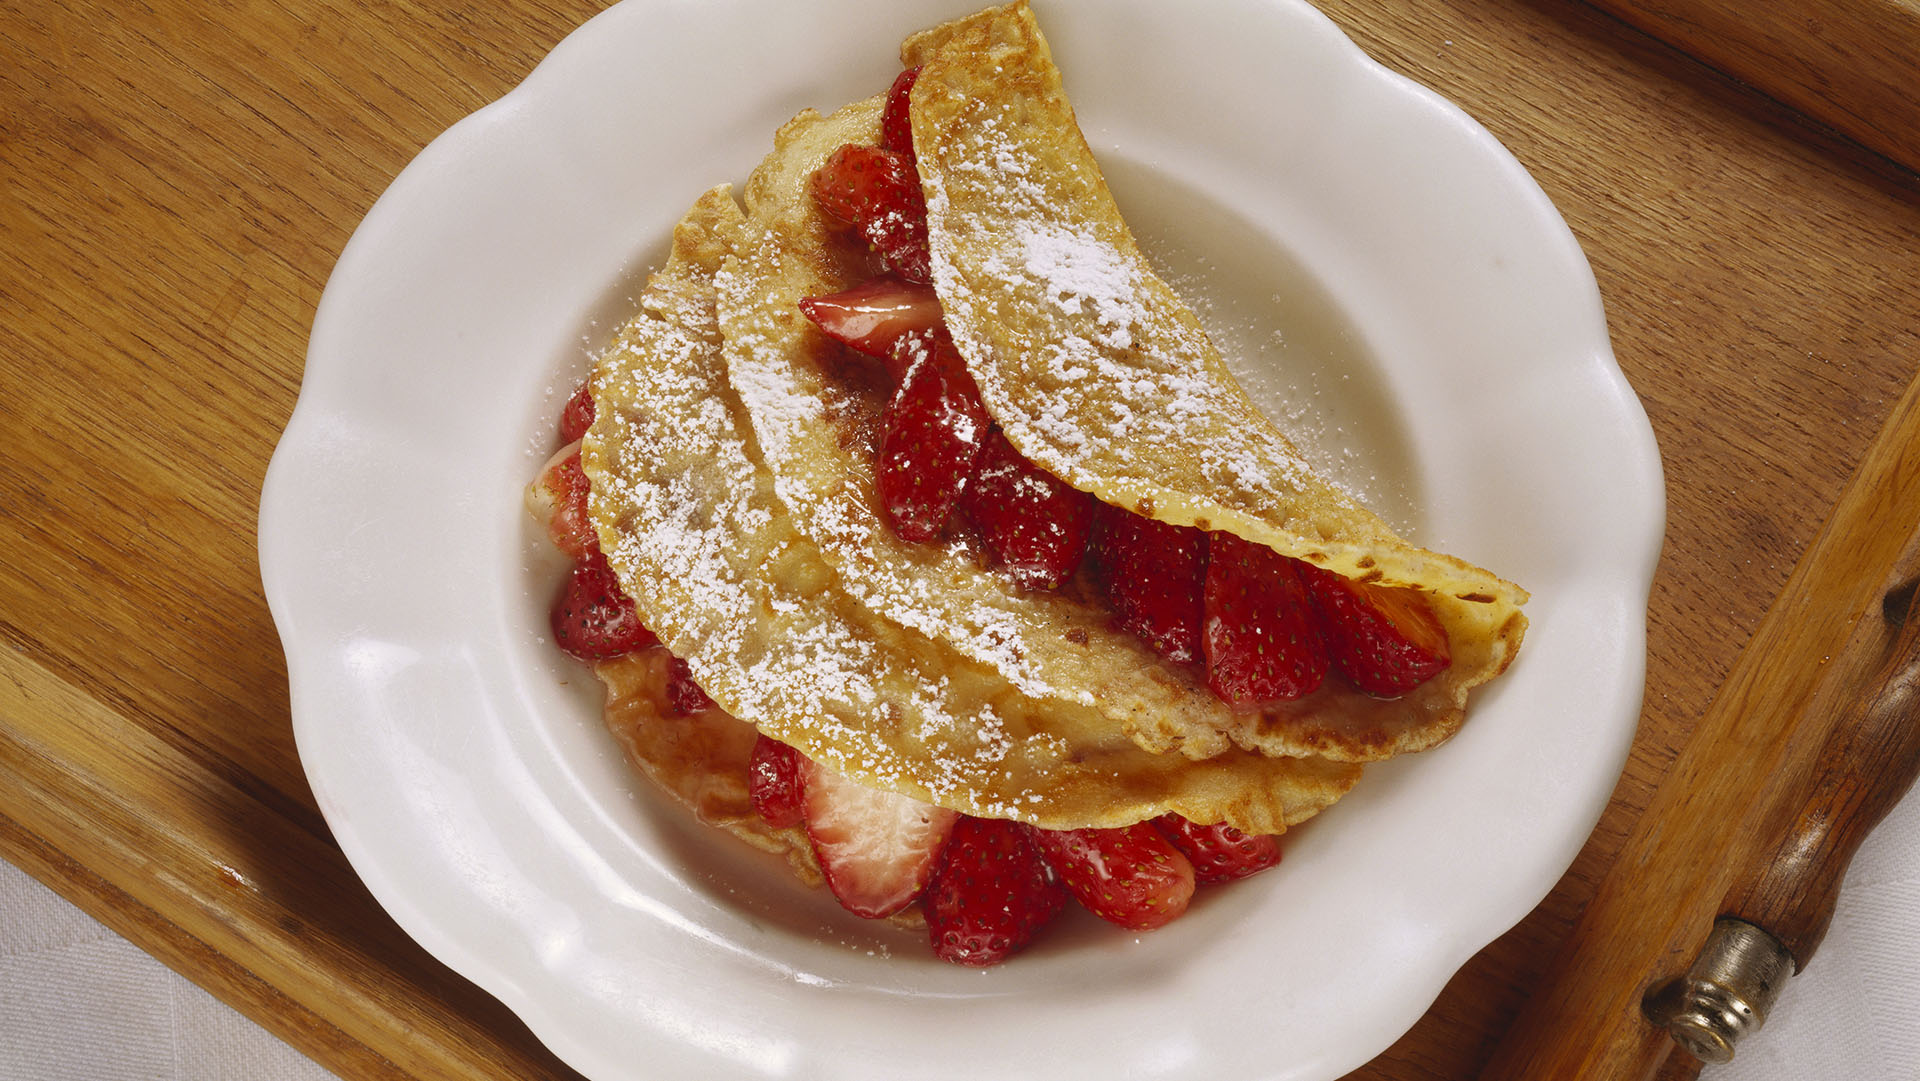 Crepes filled with Strawberries